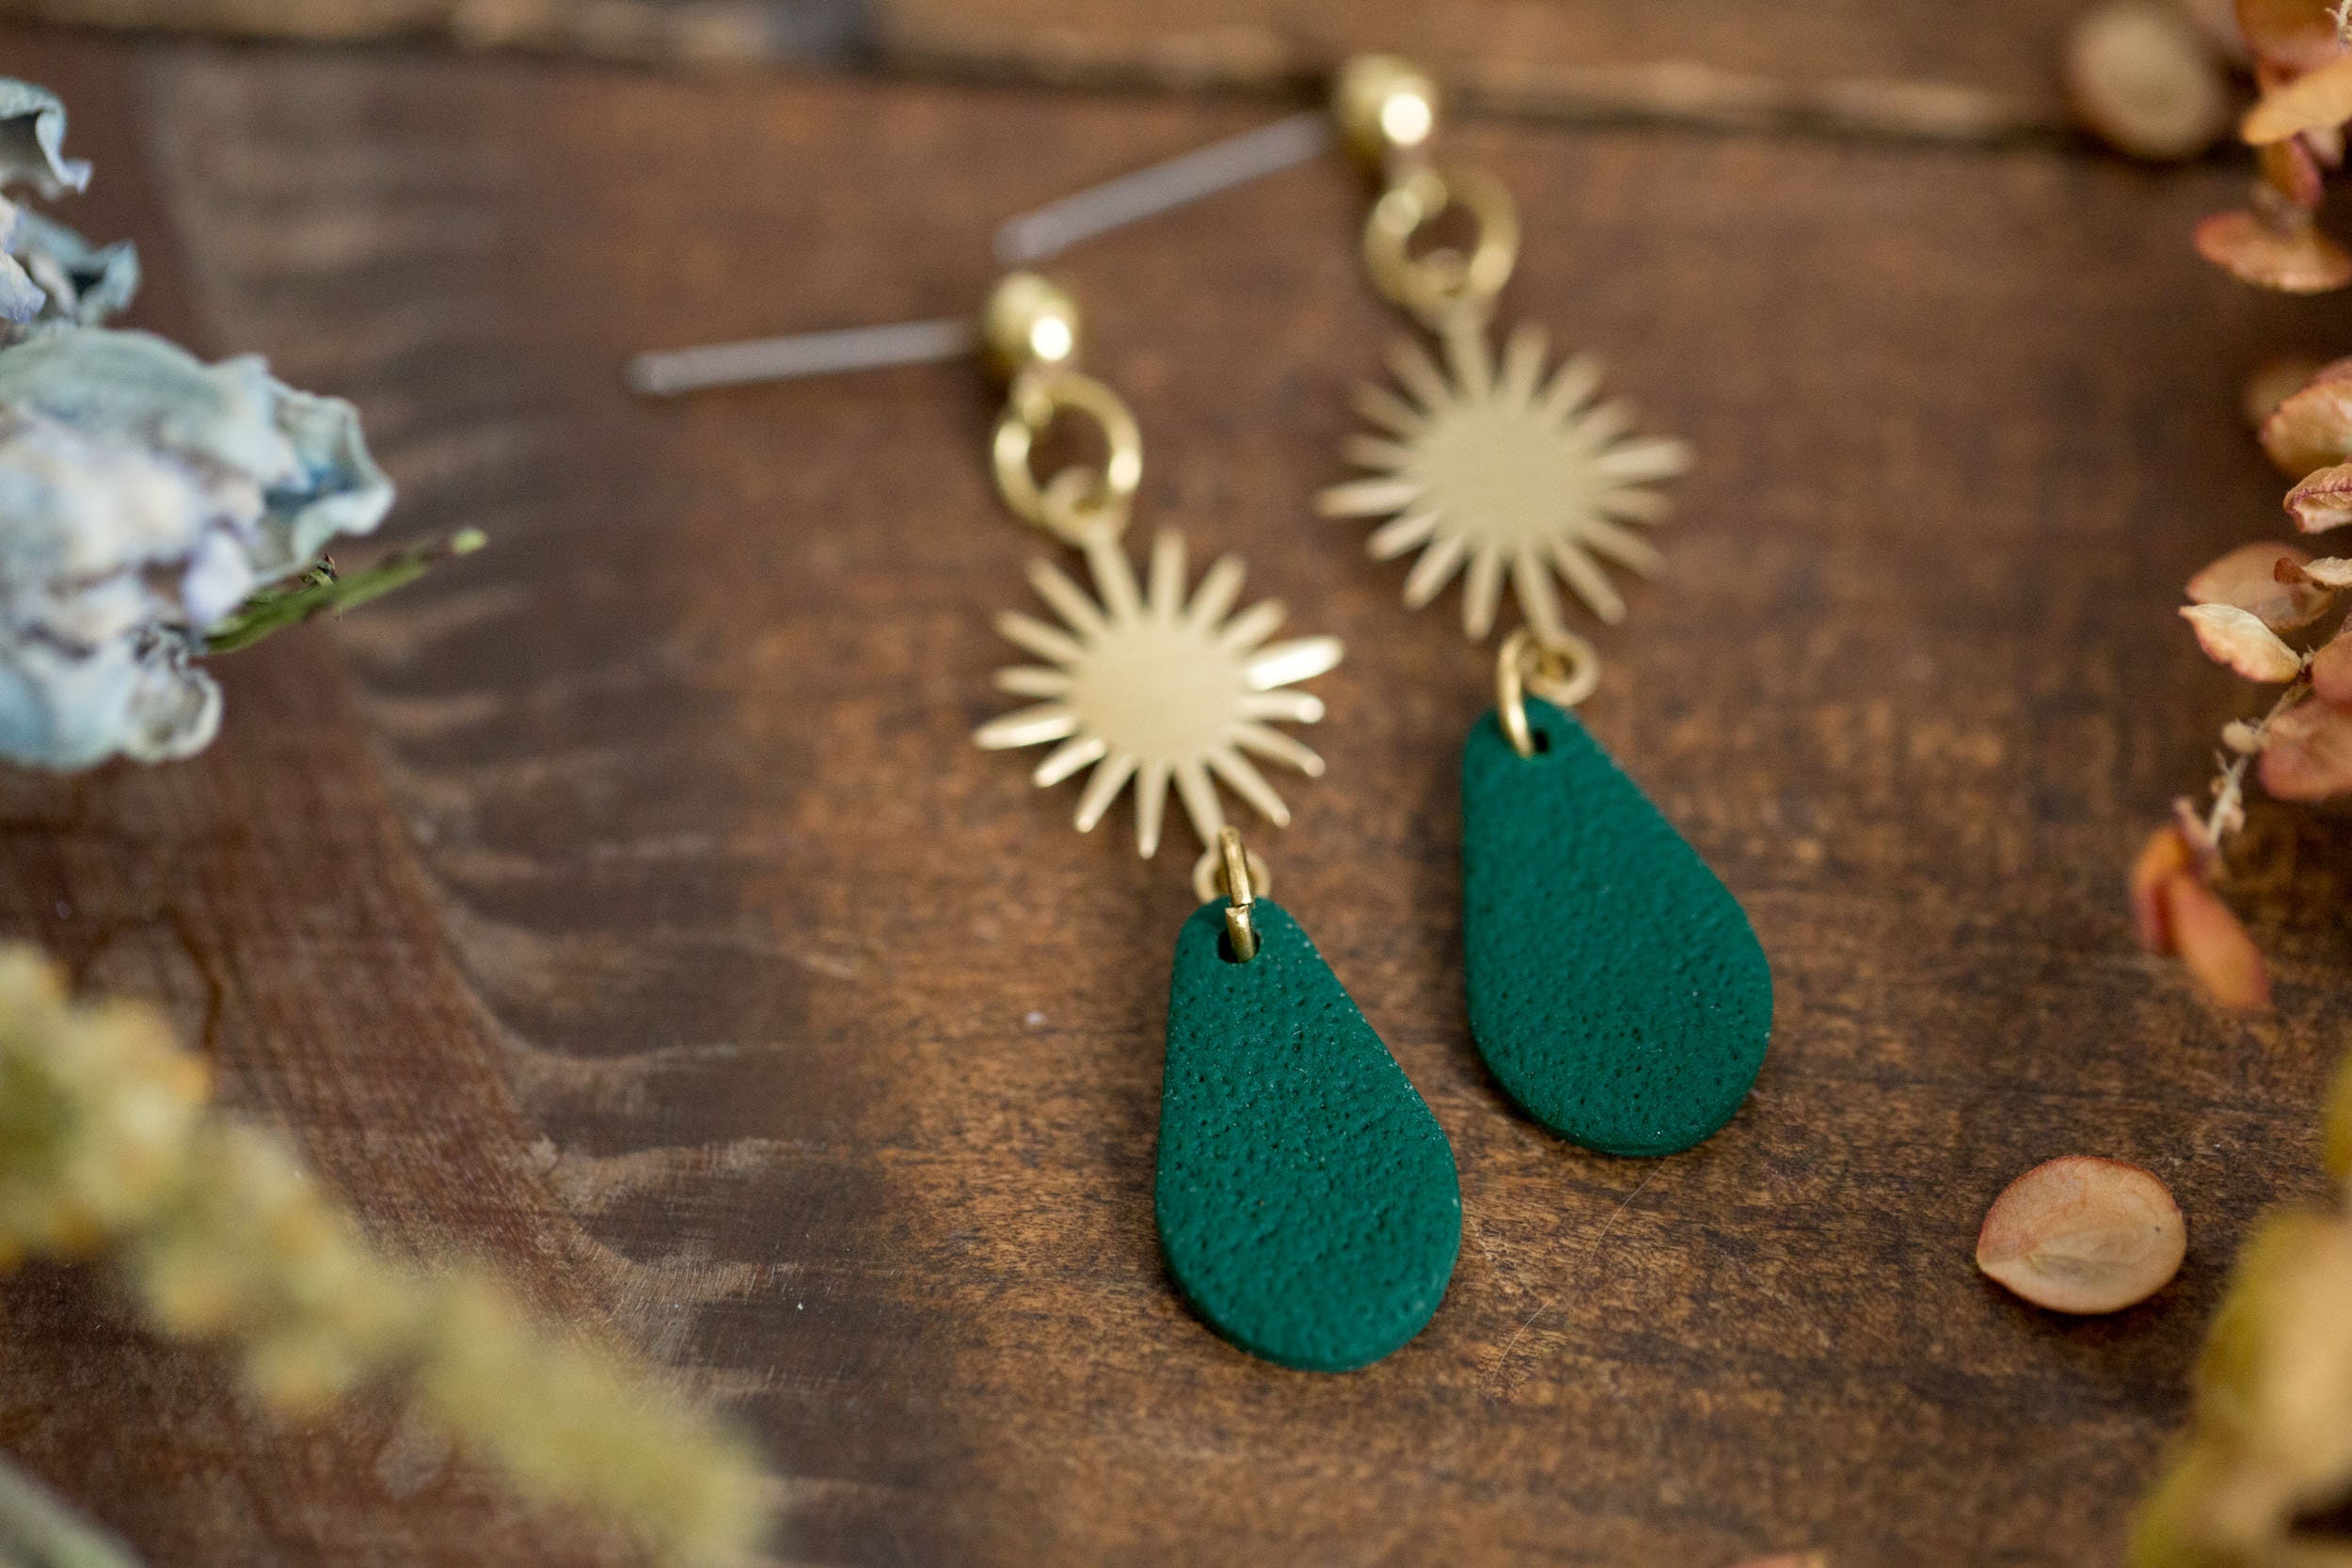 Rainy Day Earrings - Polymer Clay, brass and 14K gold fill ear